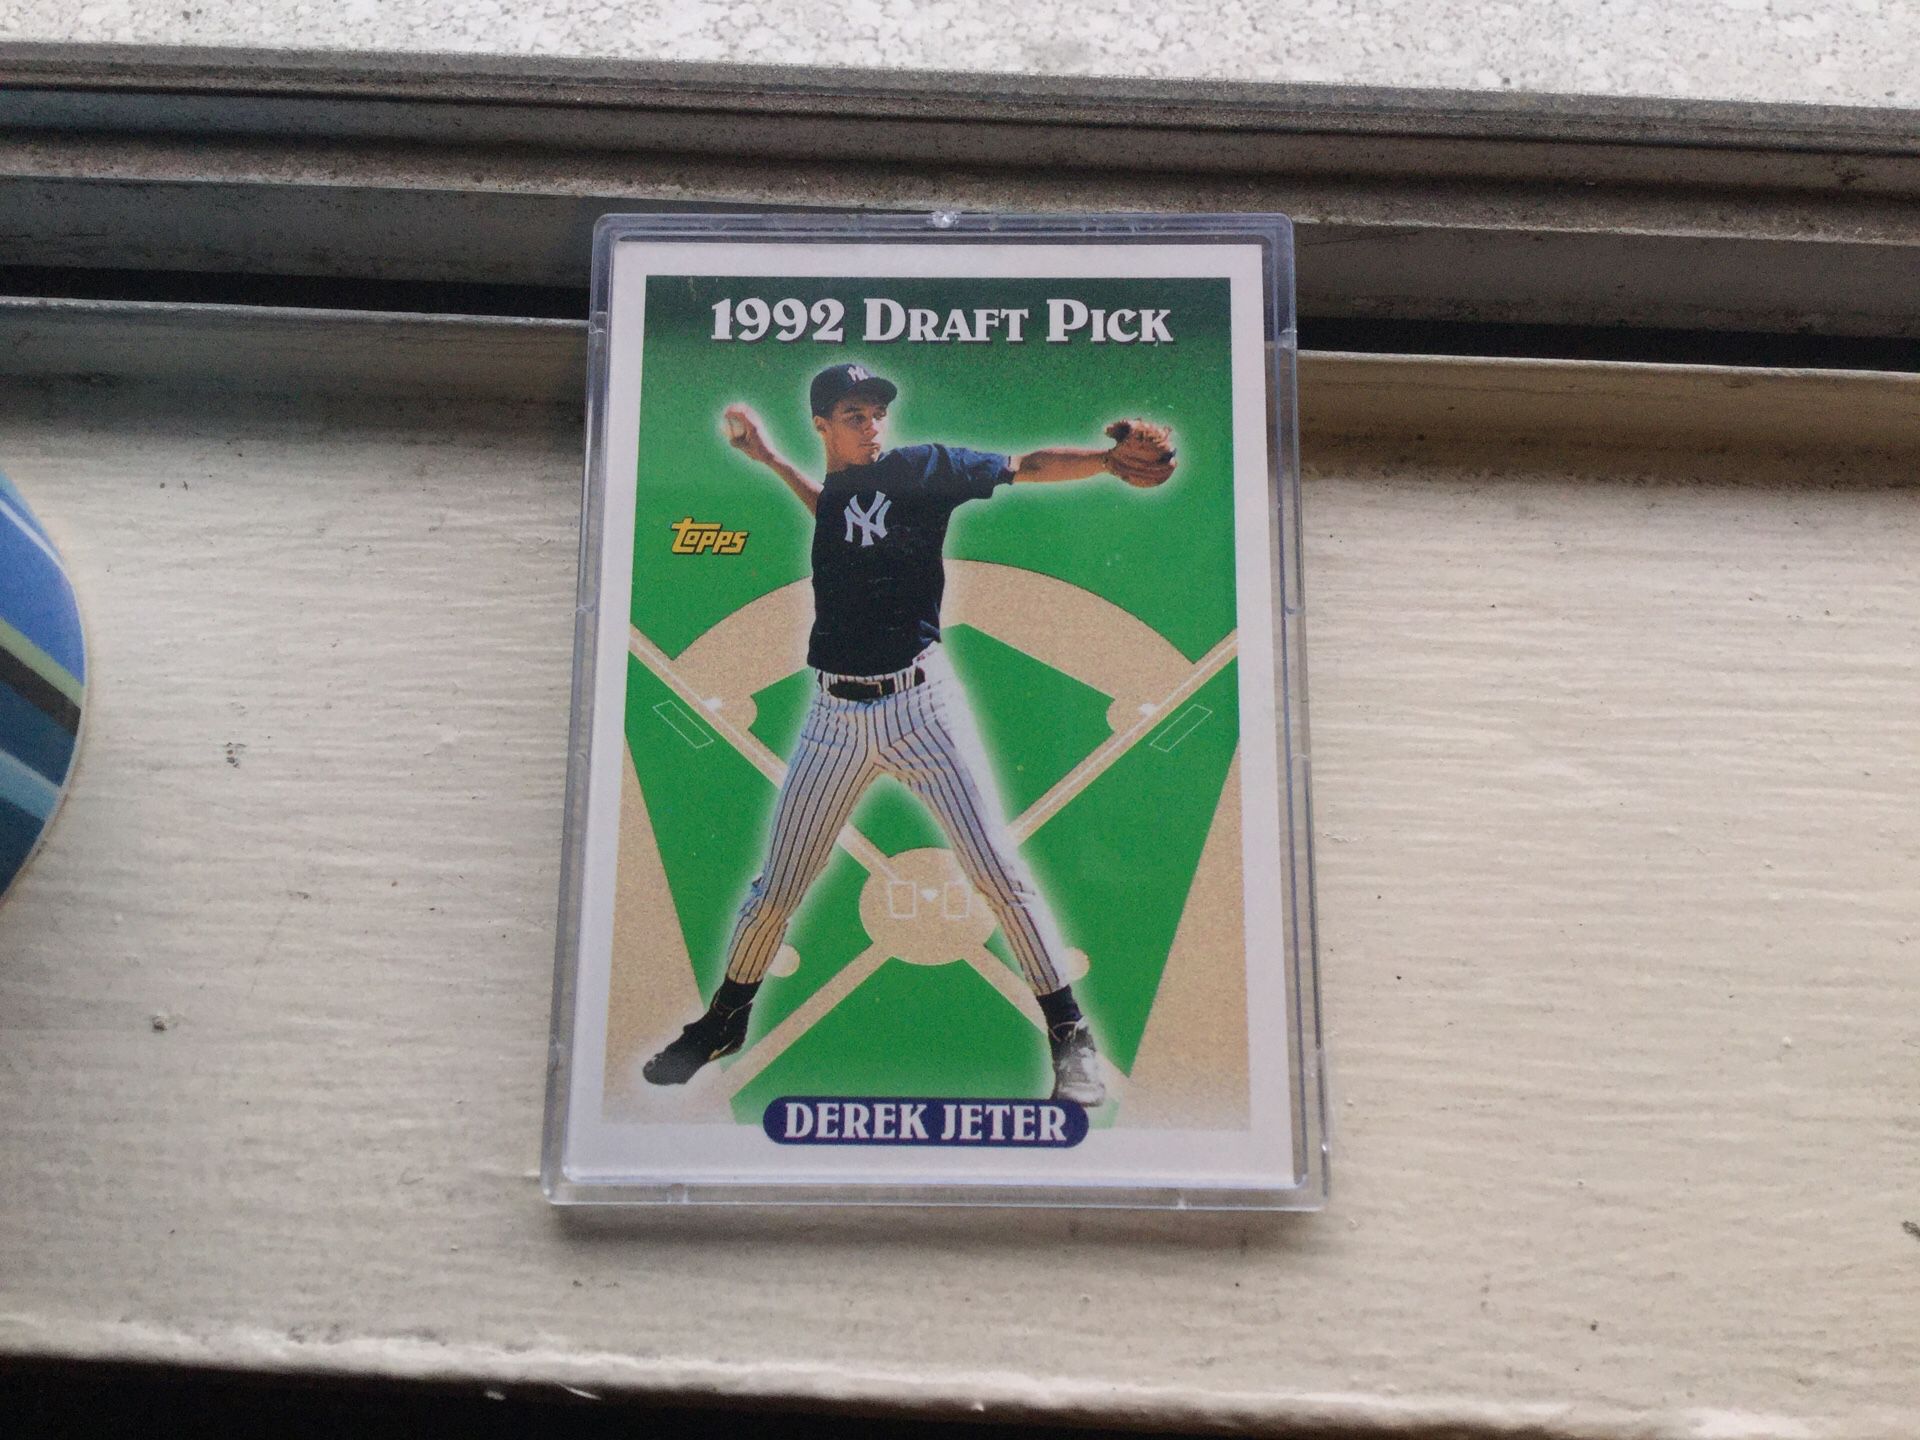 DEREK JETER BASEBALL CARDS 71 cards listed Beckett April 2019 at $2.00 and up, 4 Rookie cards $300.00 for the lot. HALL OF FAME